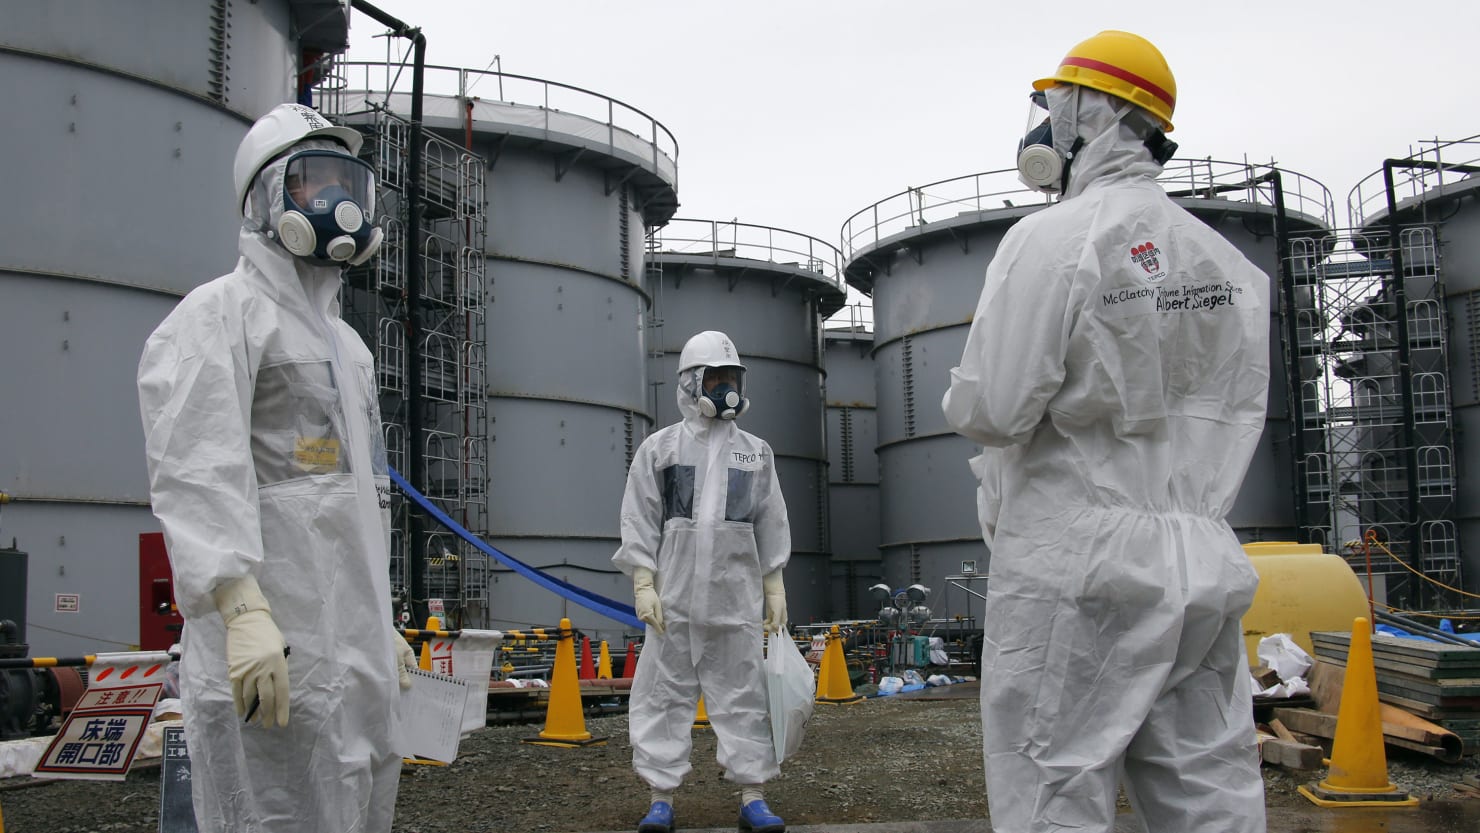 Man who predicted Fukushima, the worst nuclear disaster since Chernobyl, sees coming again